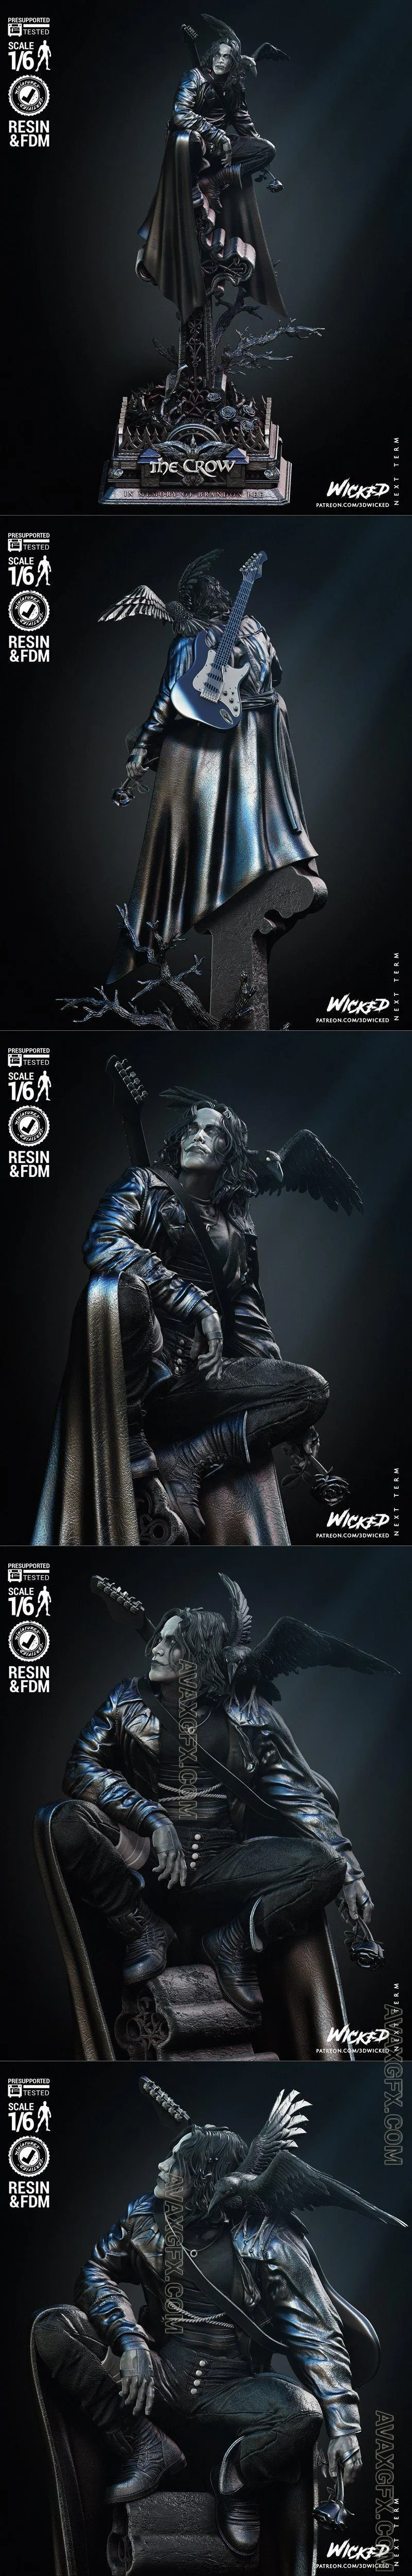 WICKED - The Crow Sculpture - STL 3D Model